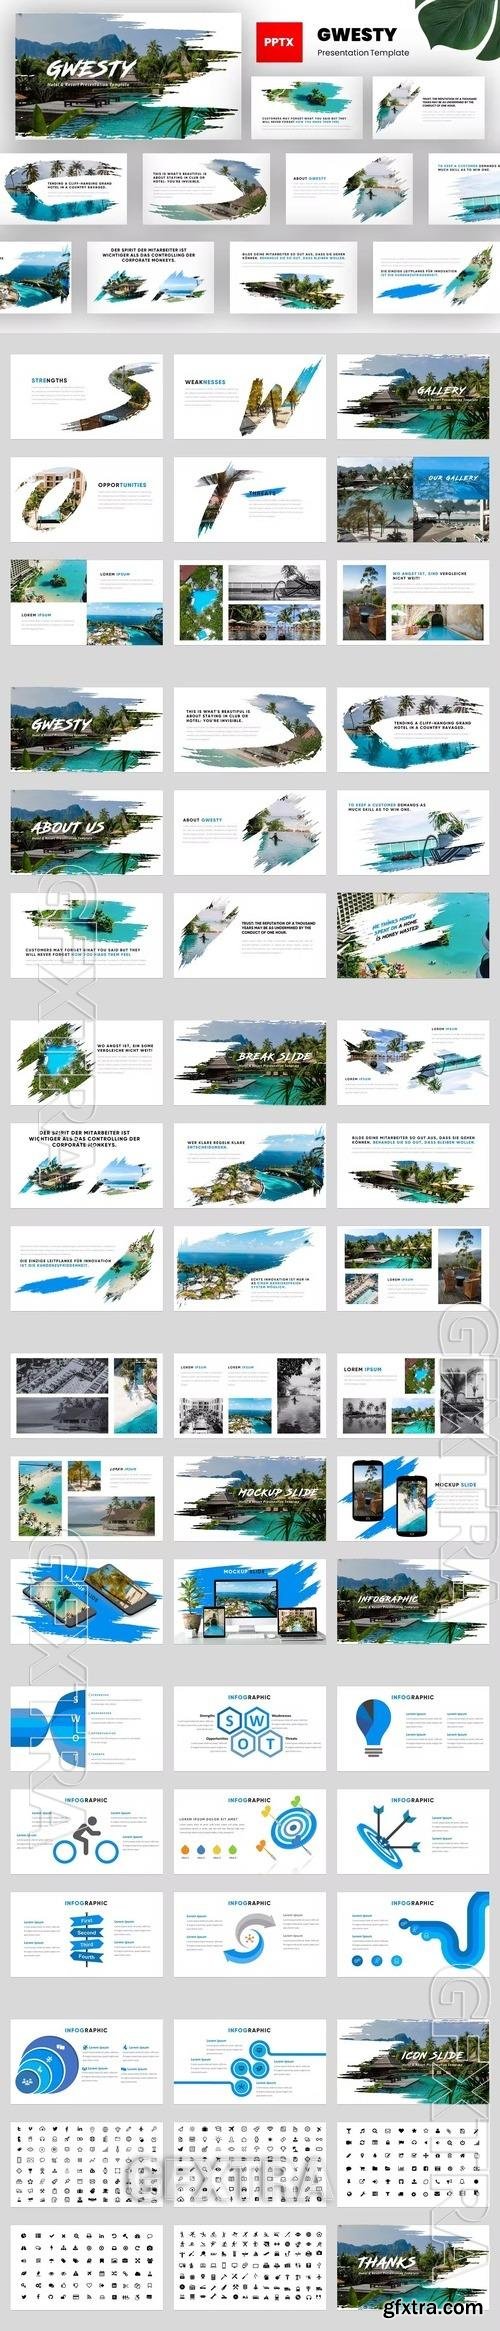 Gwesty - Hotel and Resort Powerpoint Template BCNR2SE